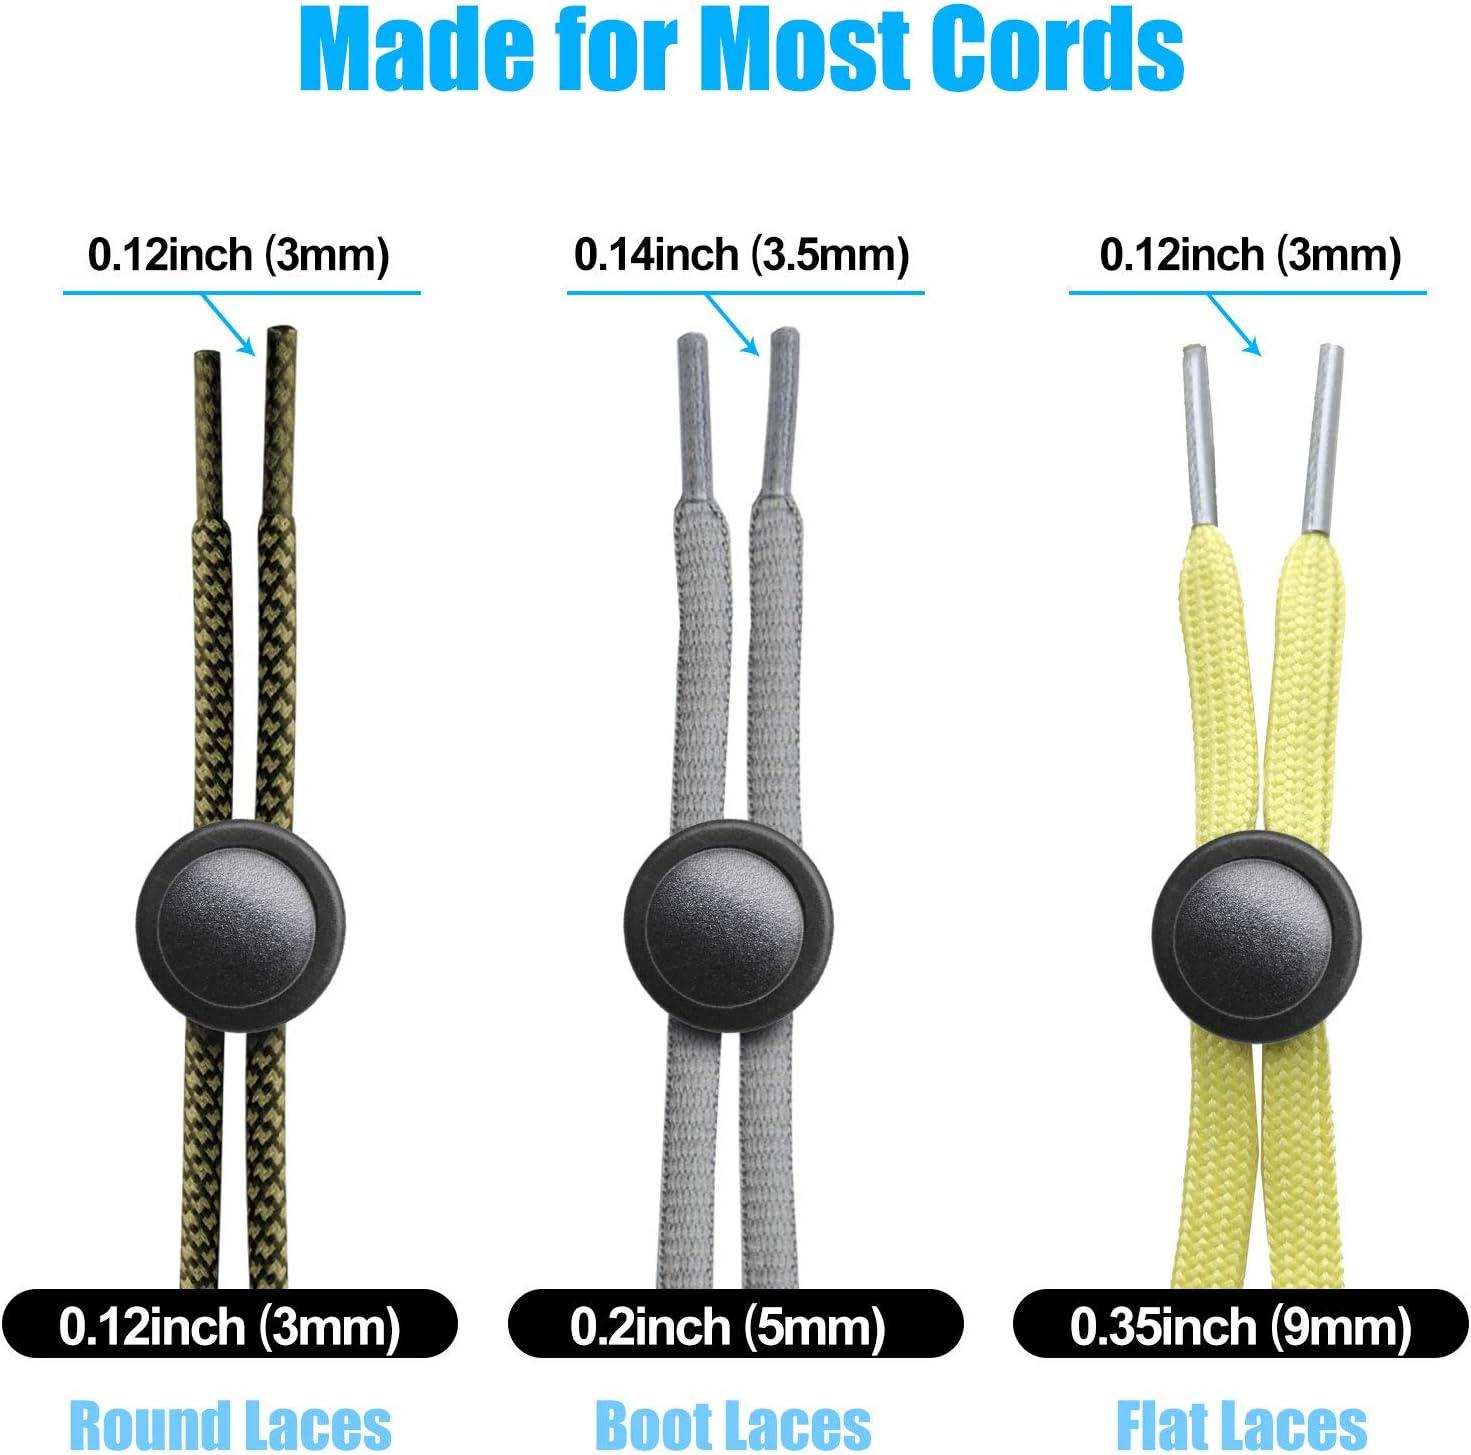 Common Uses for Cord Locks